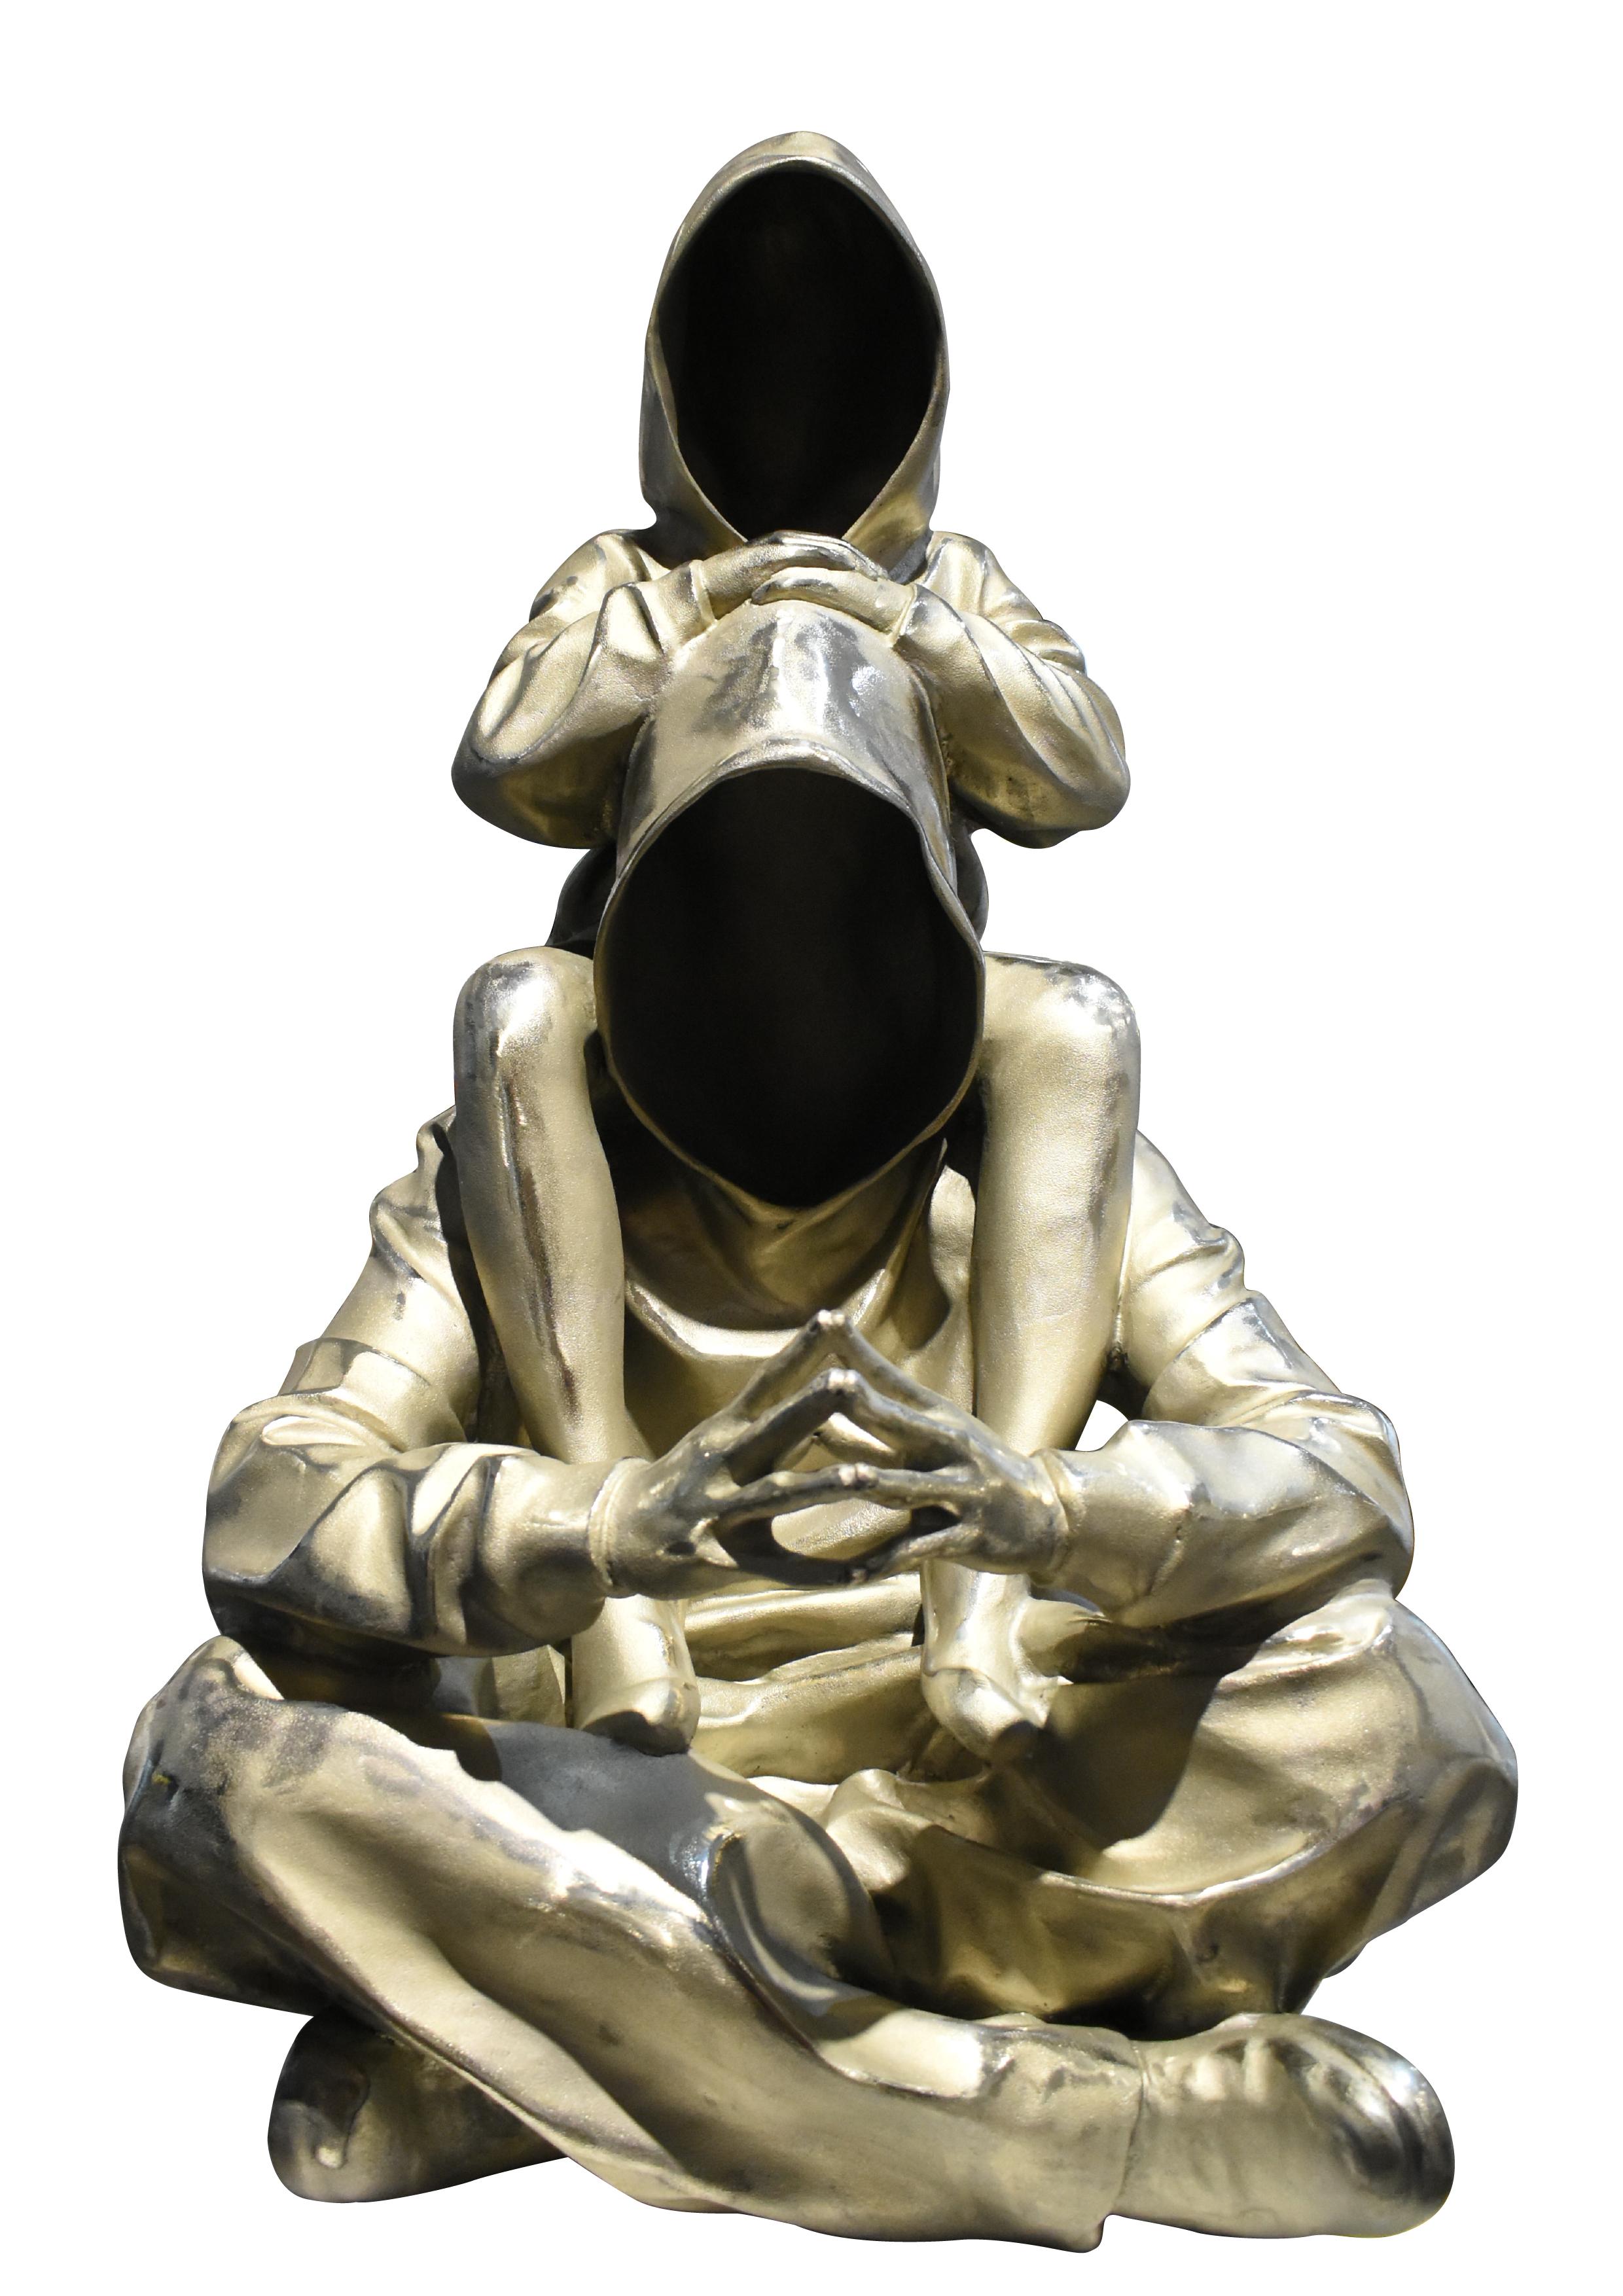 Huang Yu Long Figurative Sculpture - Hip-hop Hoodie Sculpture Bronze & Aluminium made, Limited Editions available